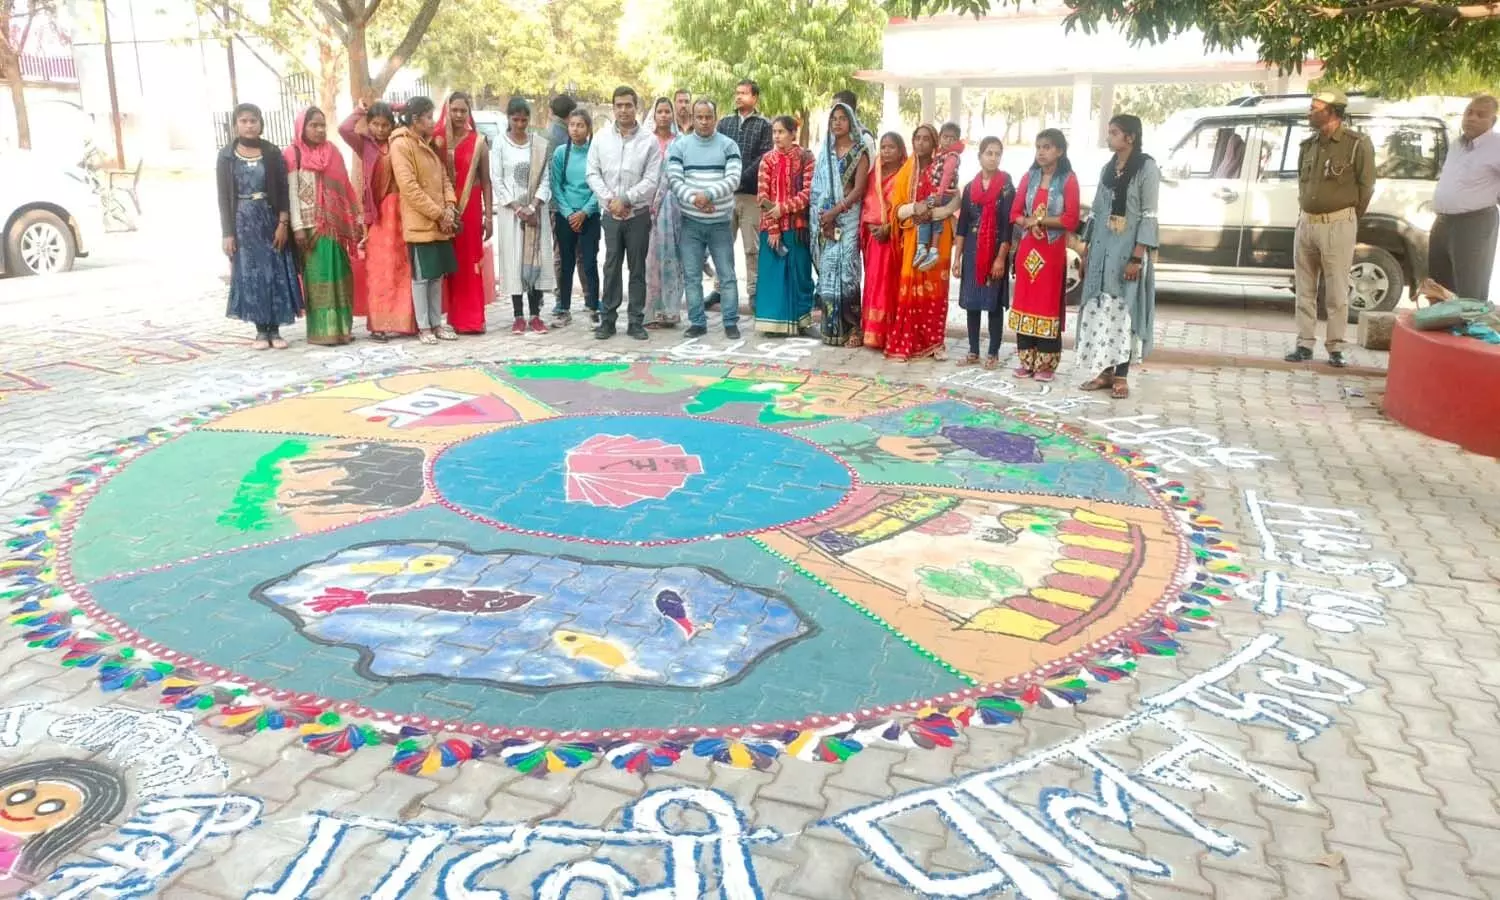 Students showed talent through rangoli, painting, song and music on UP Day in Sonbhadra